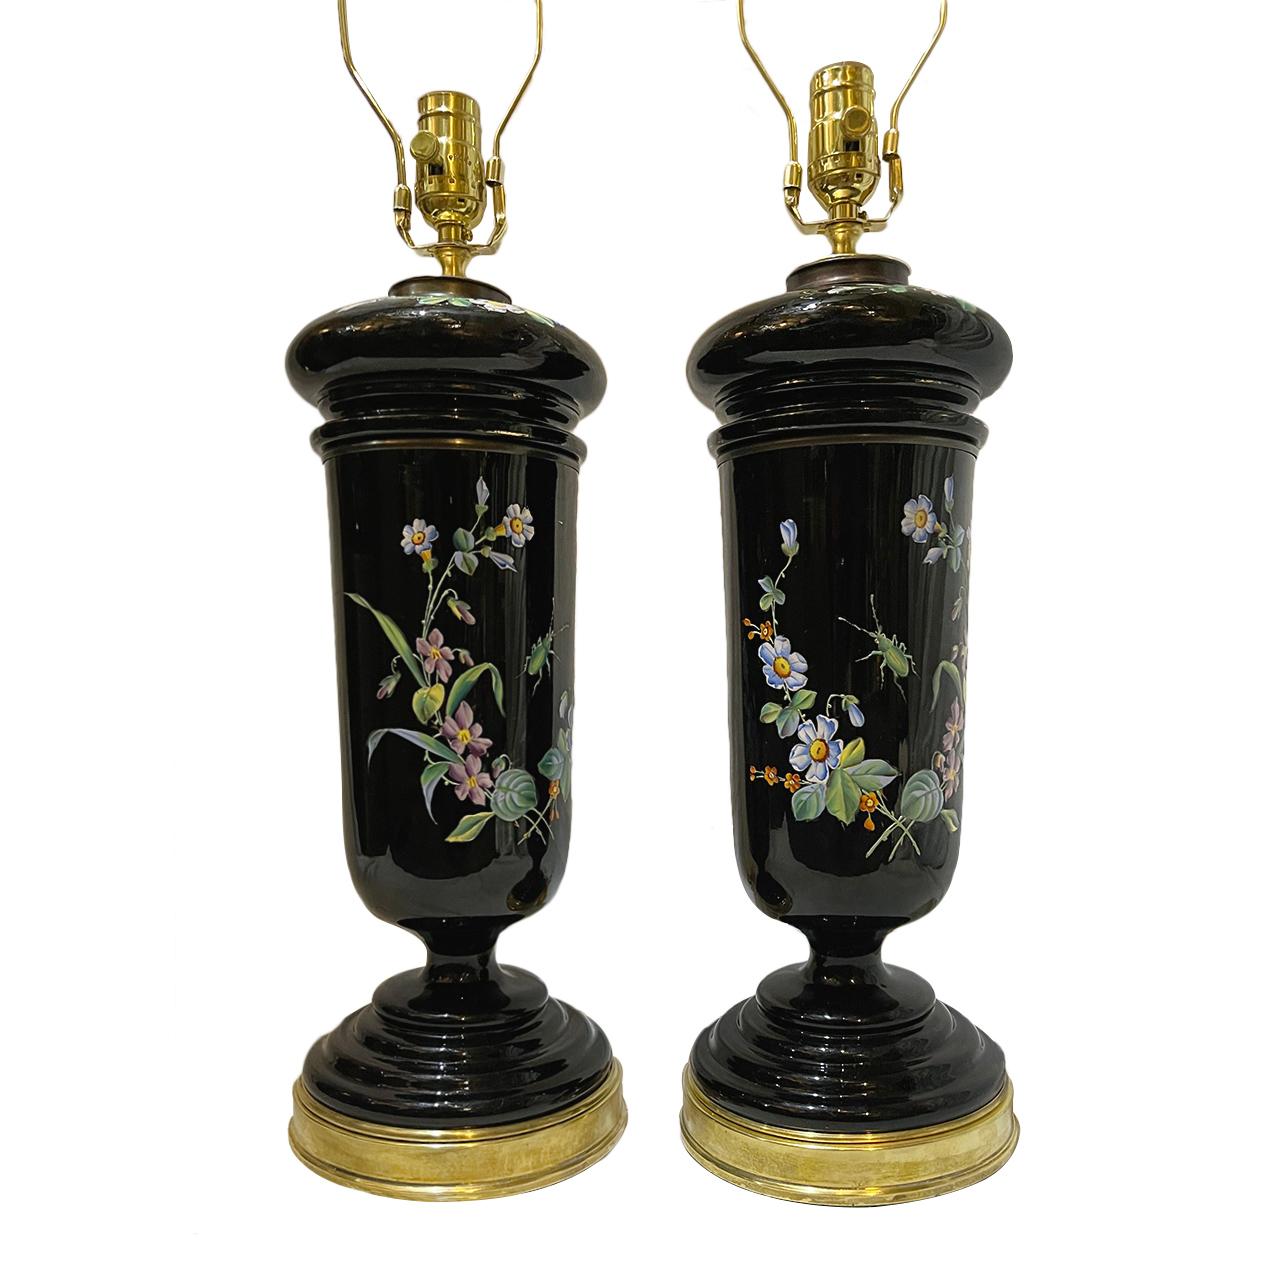 Pair of circa 1920's English porcelain floral lamps with gilt bases.

Measurements:
Height of body: 17.5